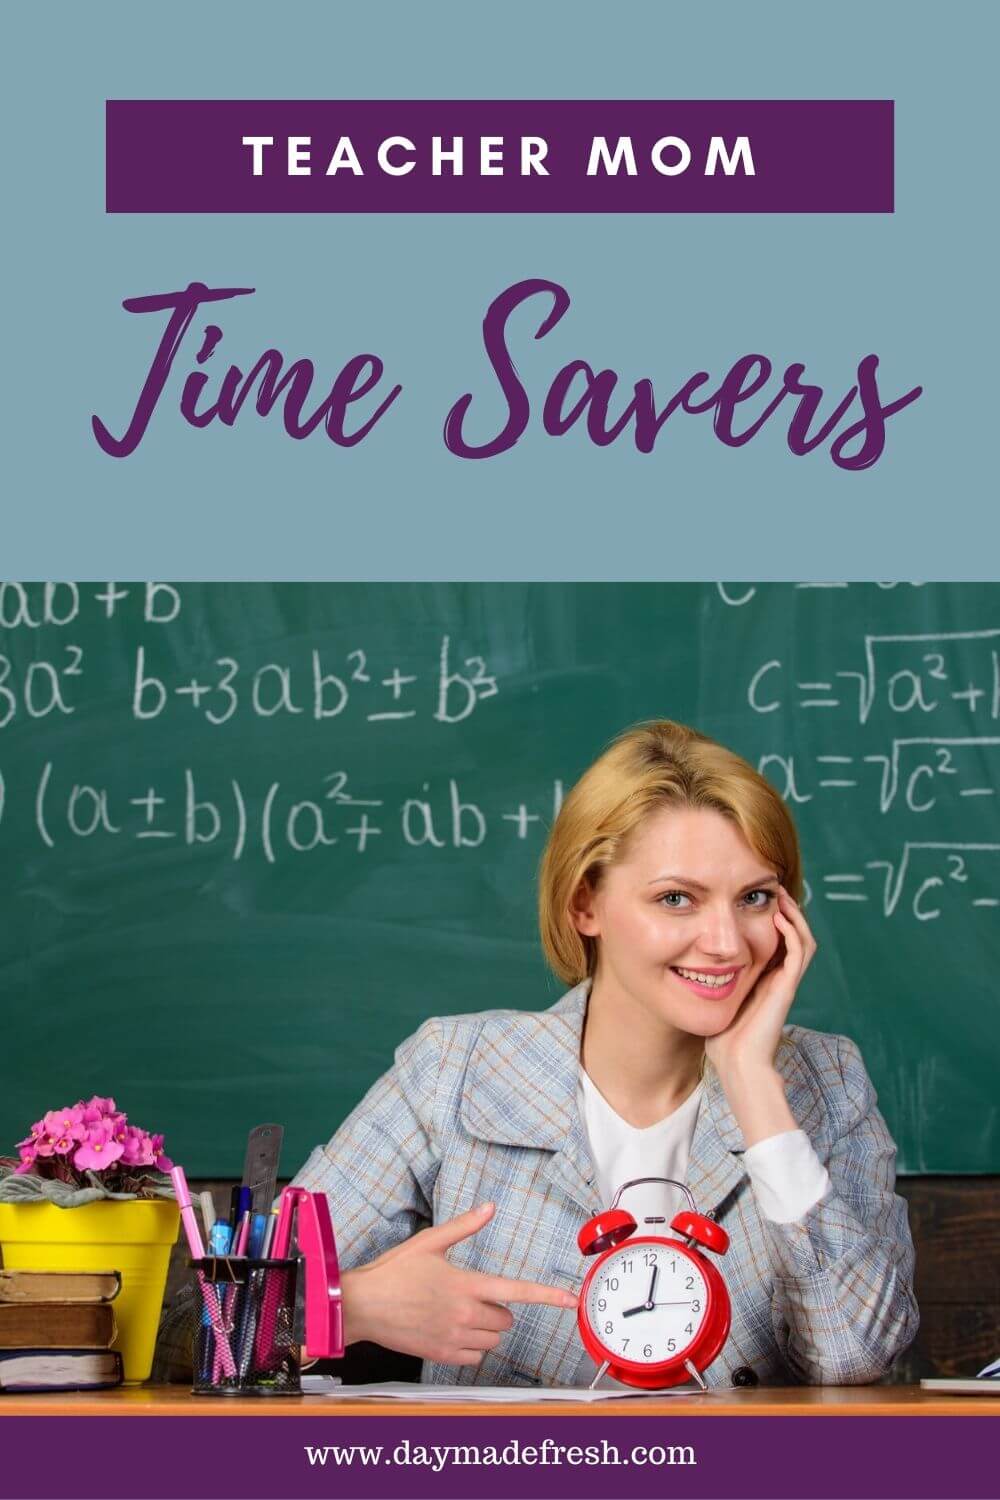 Image Text" Teacher Mom Time Savers Image: Teacher mom sitting at a desk in front of a blackboard